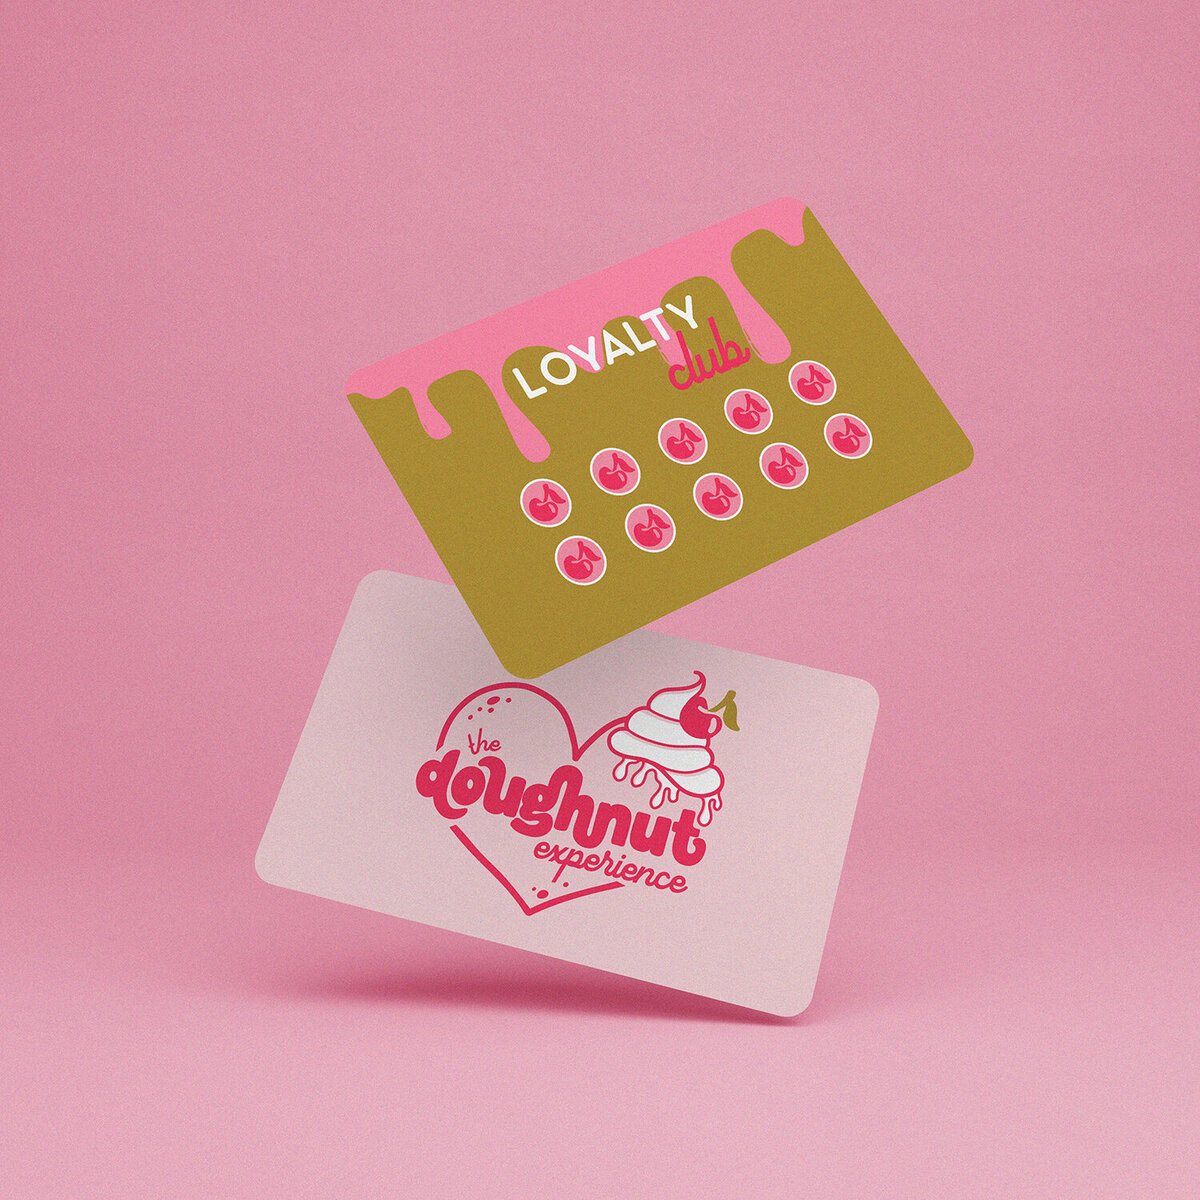 Loyalty Card Design, Business Card Design, Creative cheeky branding infused with personality.